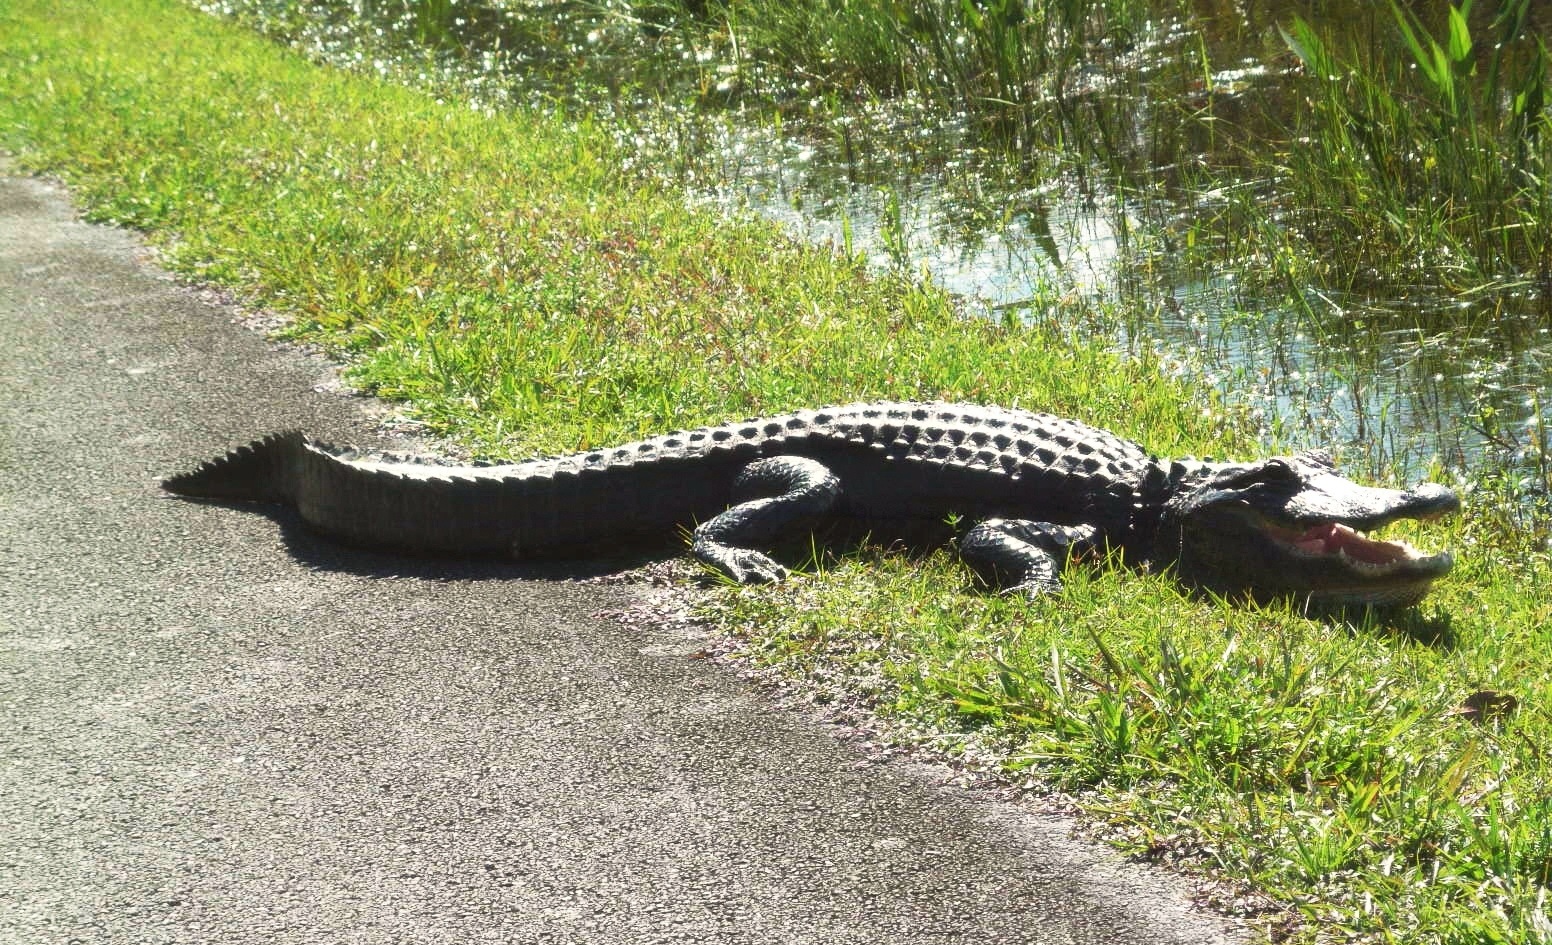 Would you believe fake alligators?